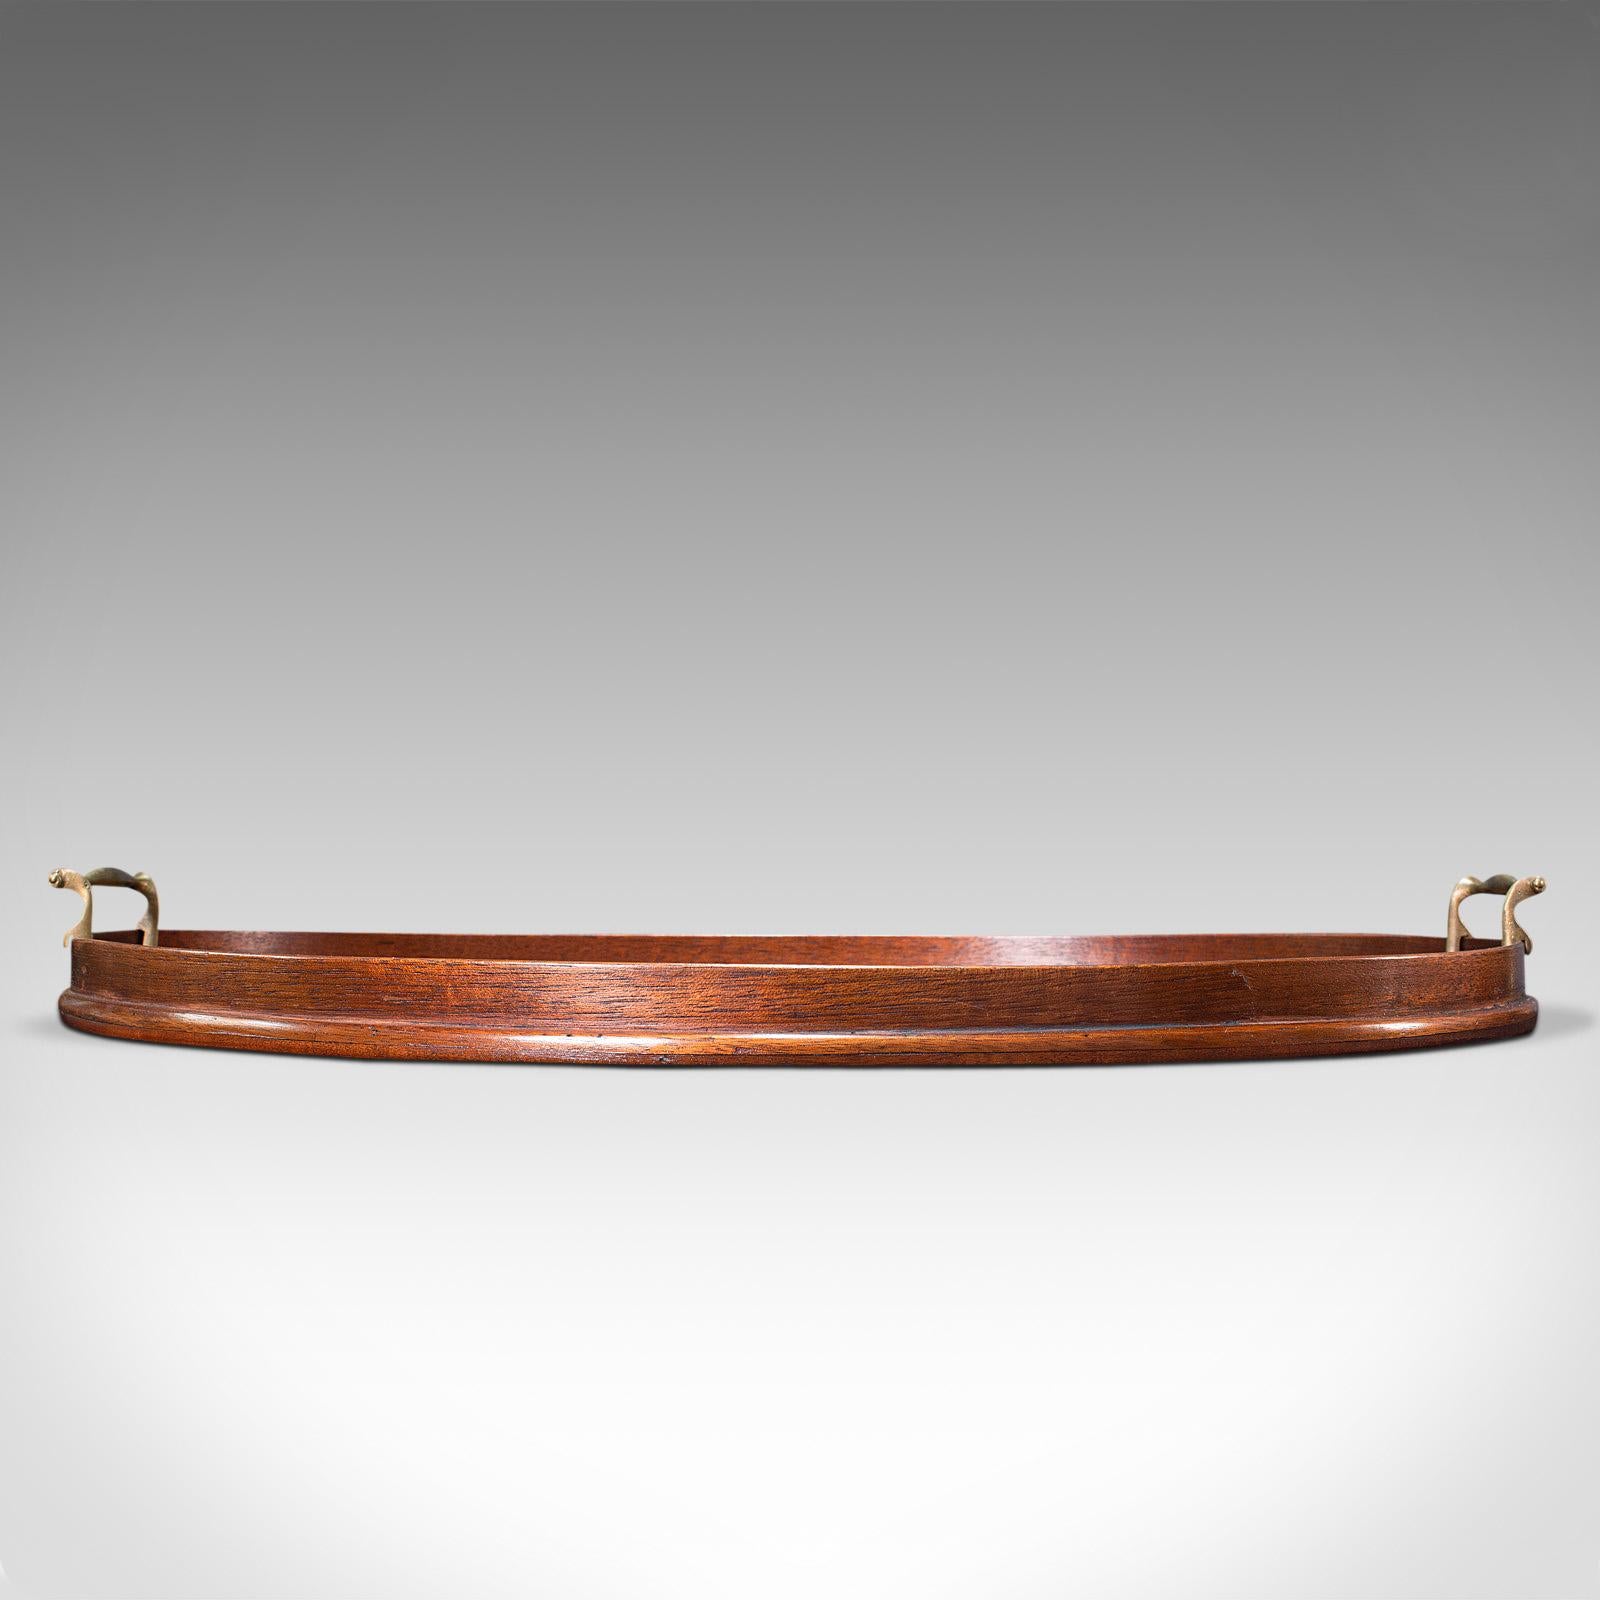 This is an antique serving tray. An English, mahogany and brass butler's platter, dating to the Georgian period, circa 1800.

Serve your favourite drinks with this delightful antique tray
Displays a desirably aged patina - one small loss to